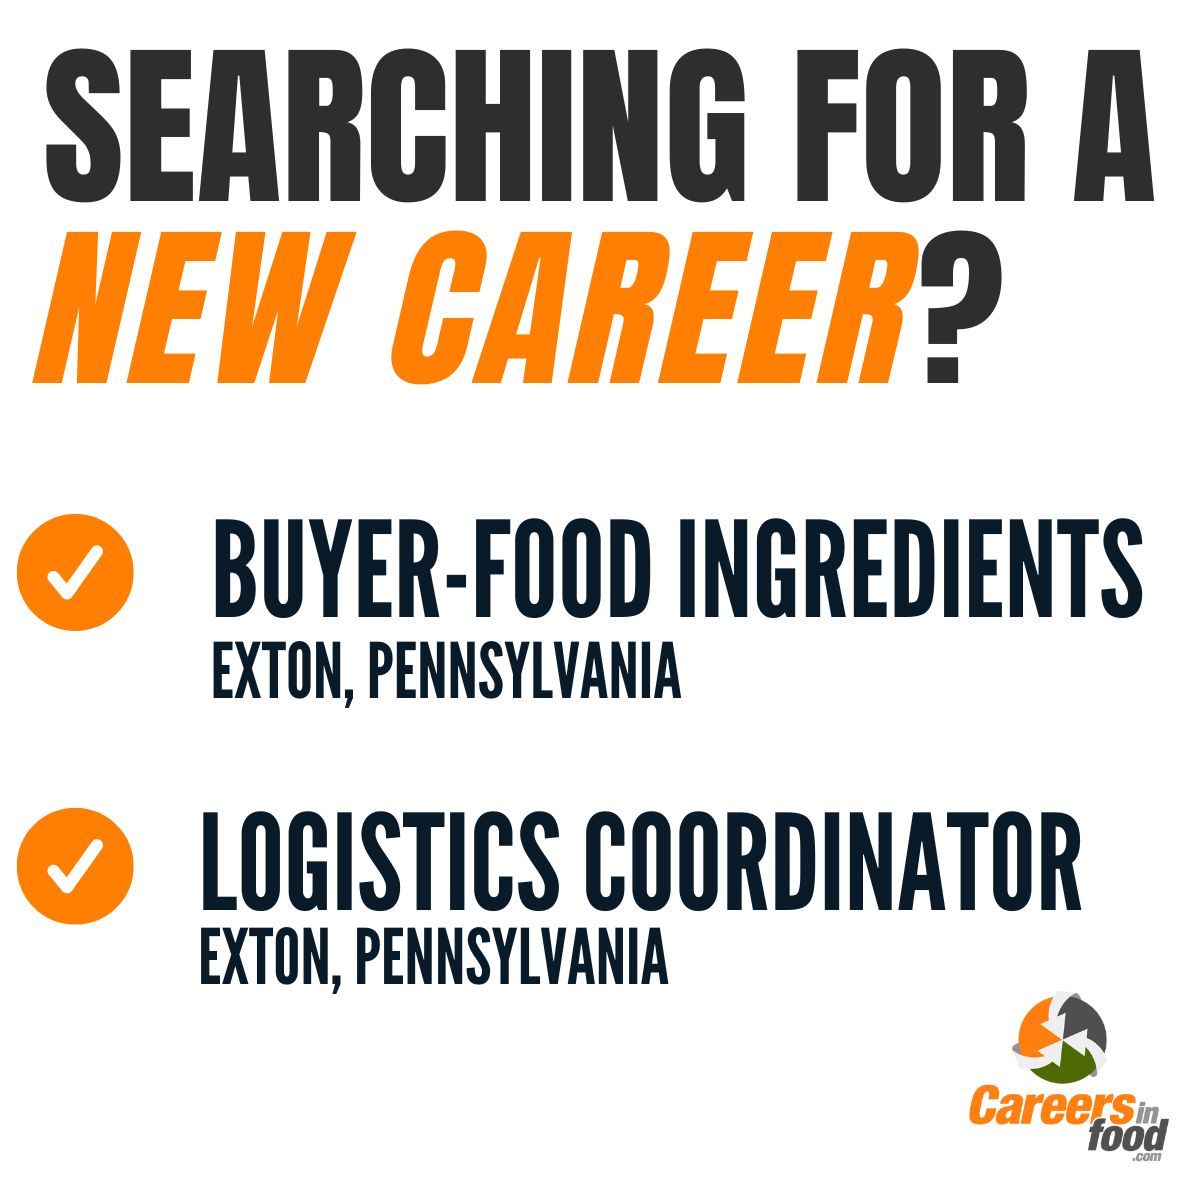 The Food Source International, Inc is hiring!

Apply as a Buyer-Food Ingredients, or a Logistics Coordinator in Exton, Pennsylvania!

Join here: careersinfood.com/the-food-sourc… 

#FoodJobs #Hiring #JobSeeker #Jobs